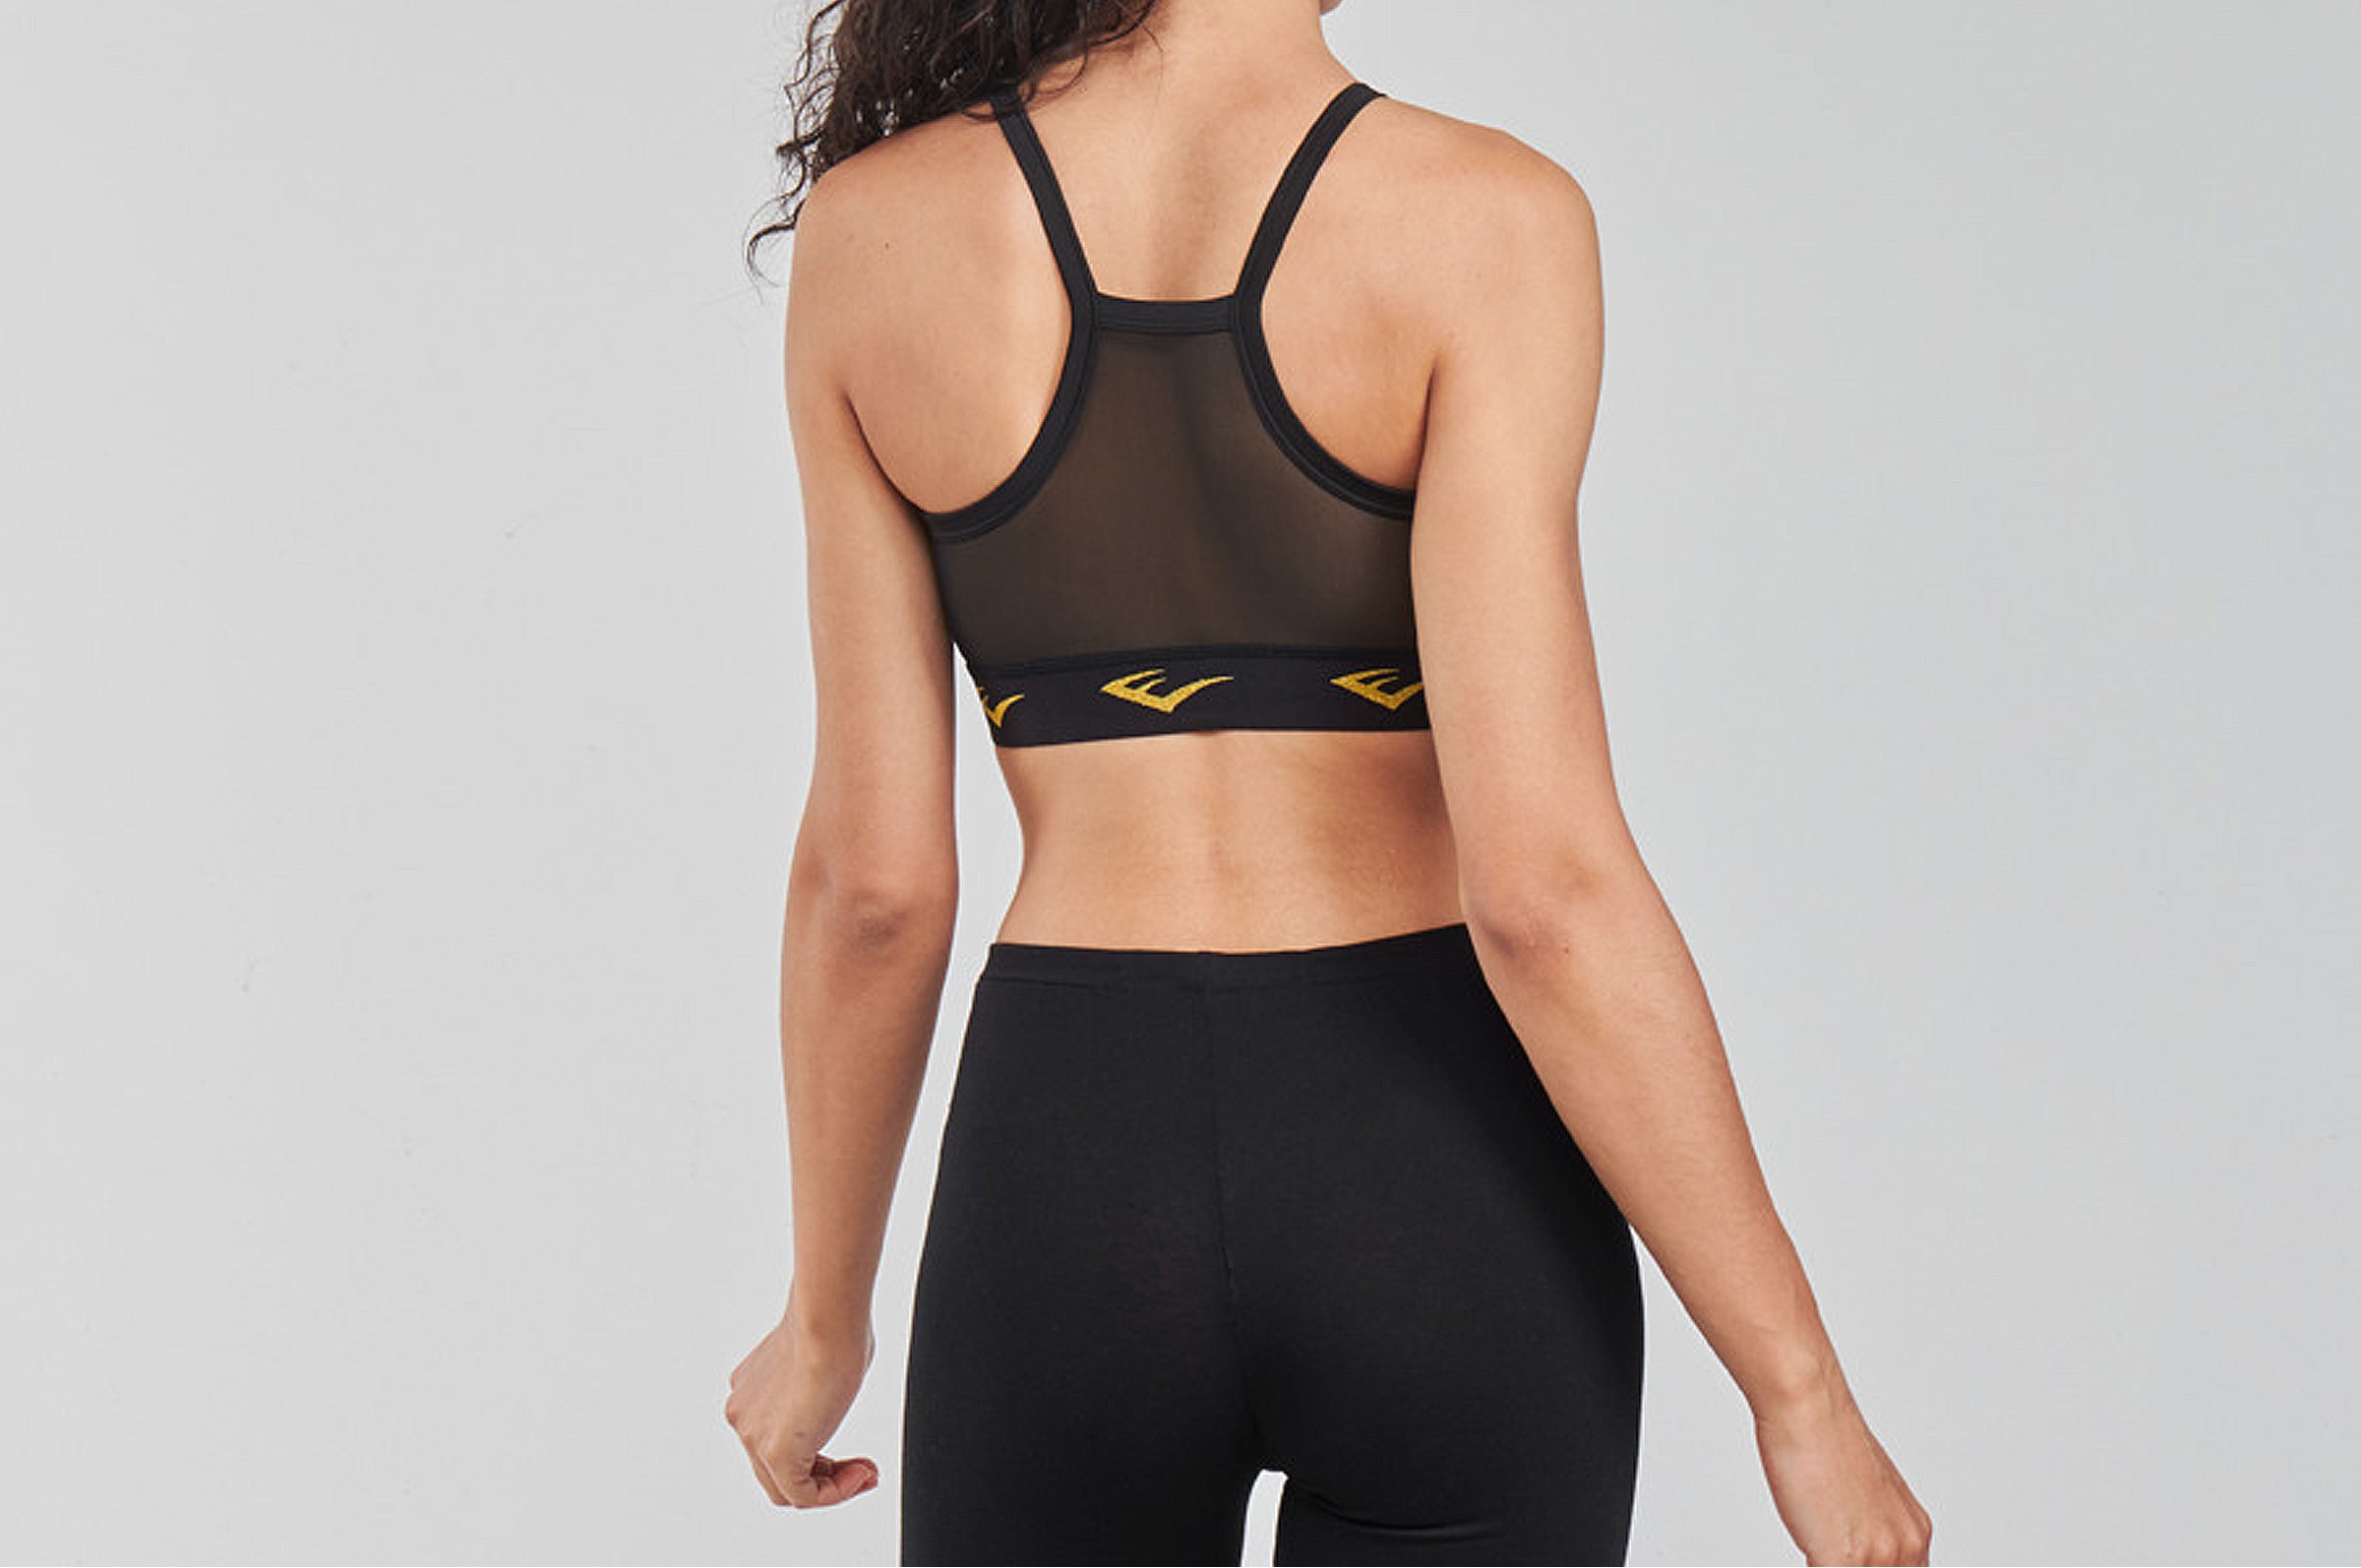 Everlast Branded Cut Out Sports Bra